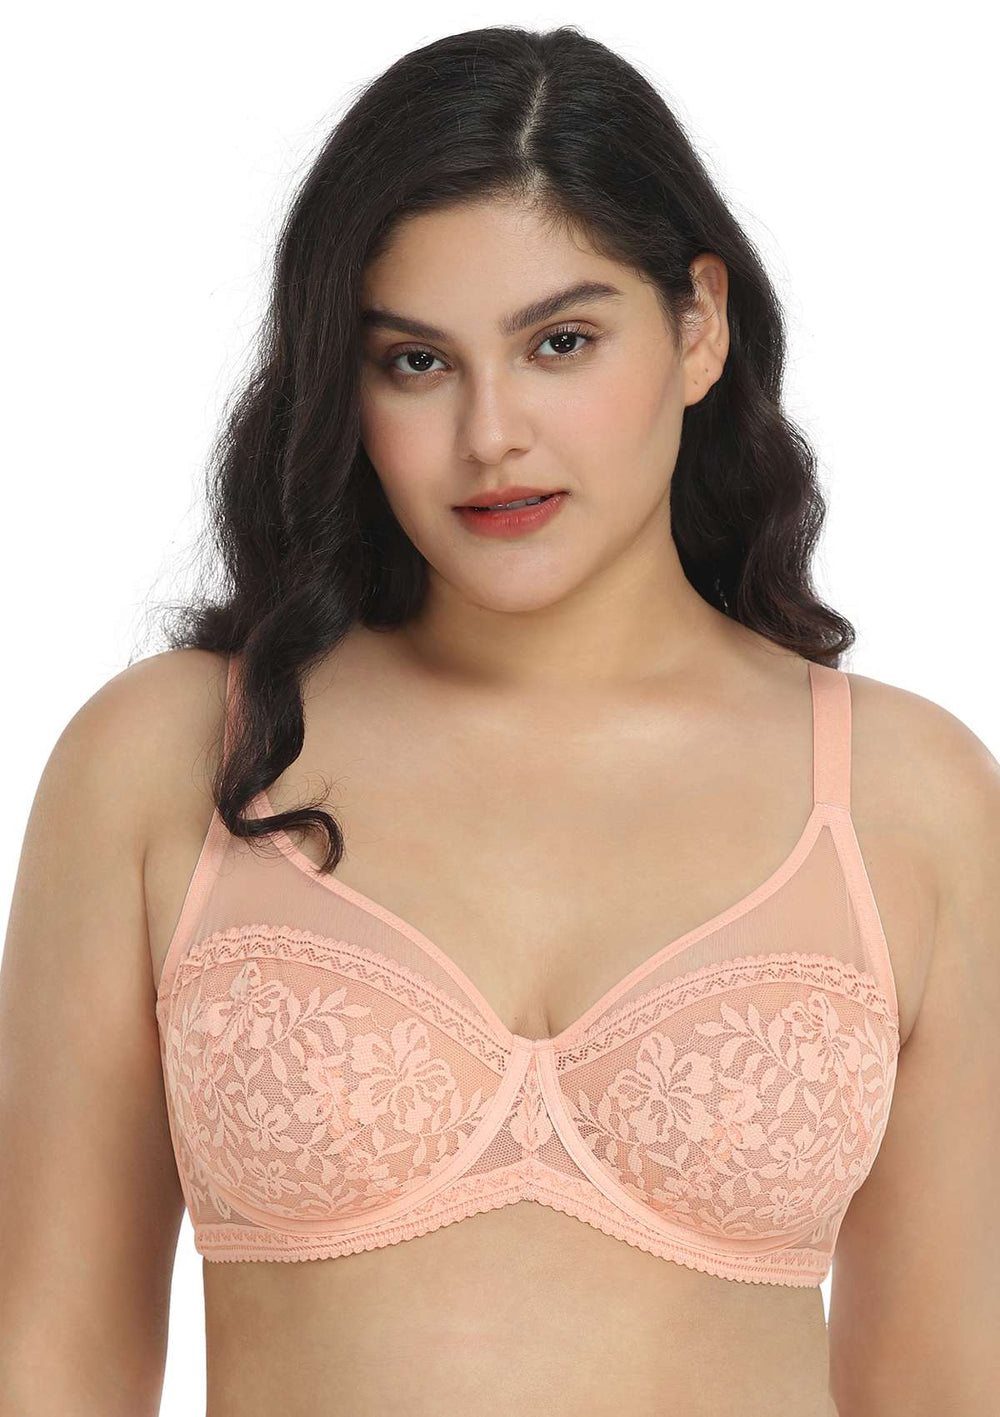 HSIA Gladioli Lace Mesh Unlined Underwire Bra and Panty Set